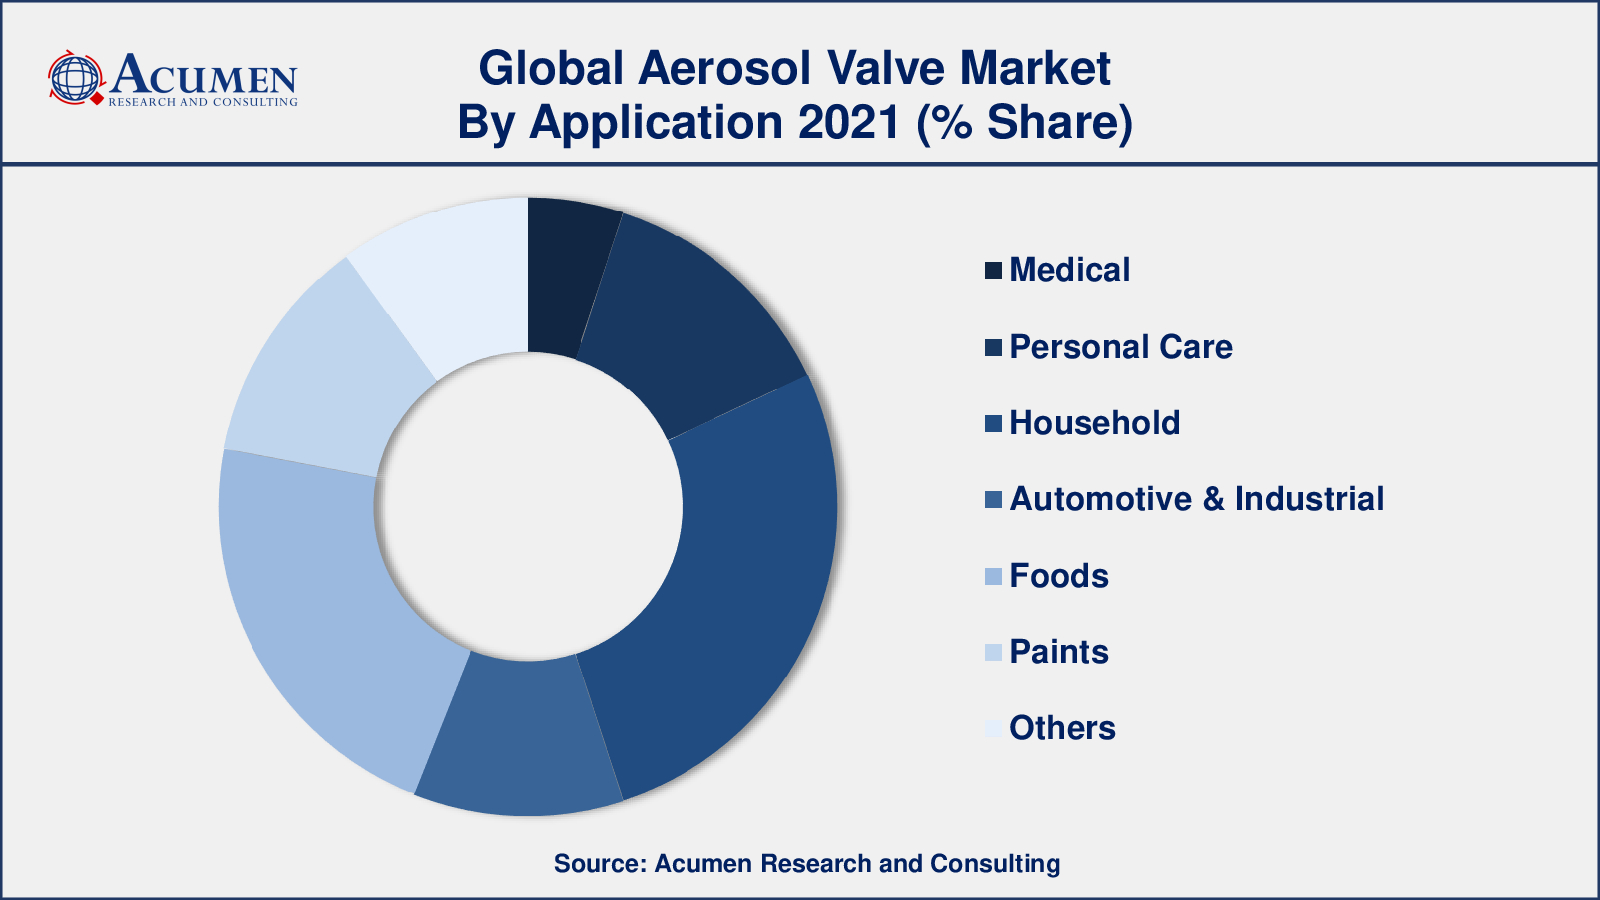 Among application, household segment engaged more than 27% of the total market share